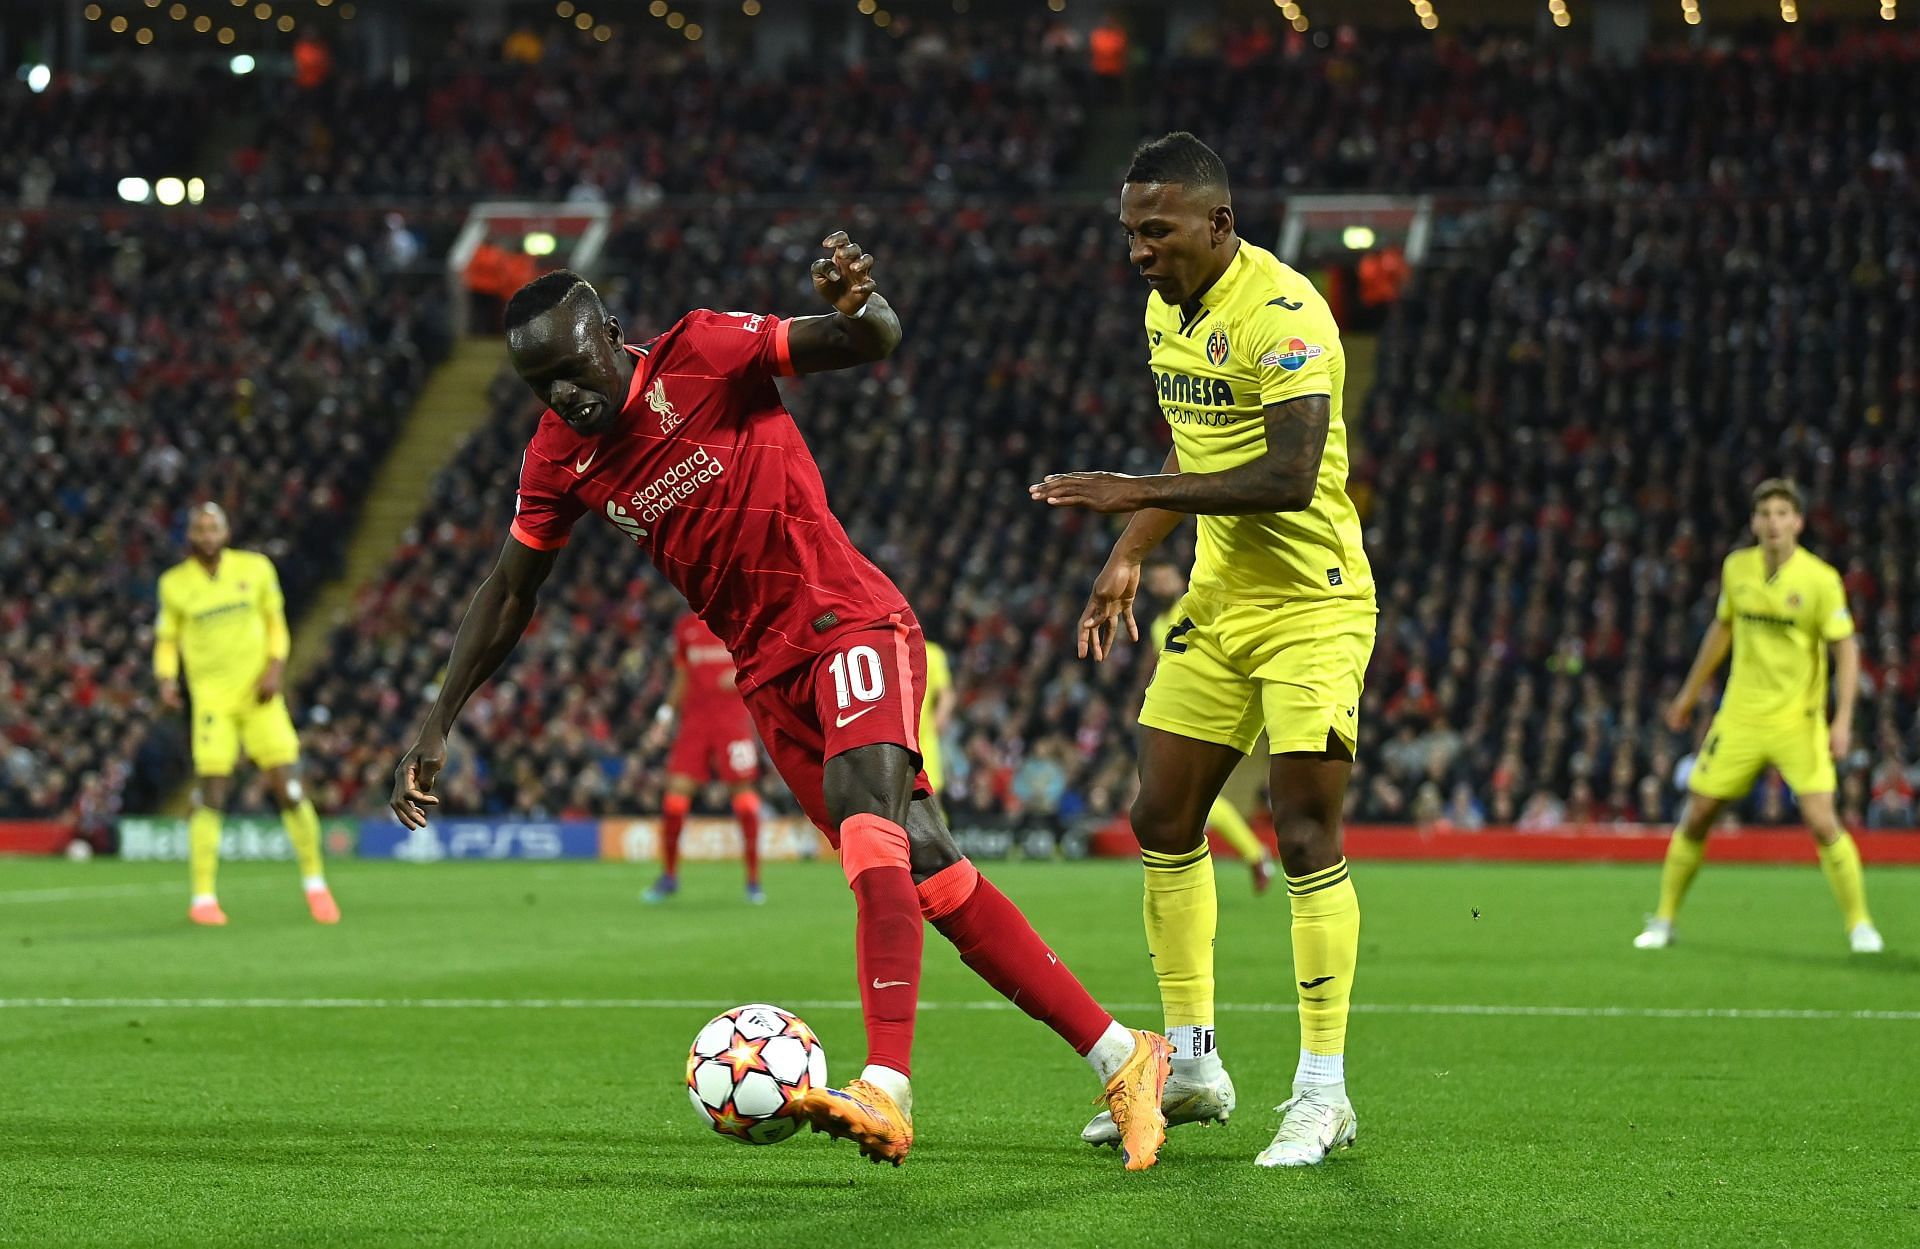 Mane in action for Liverpool